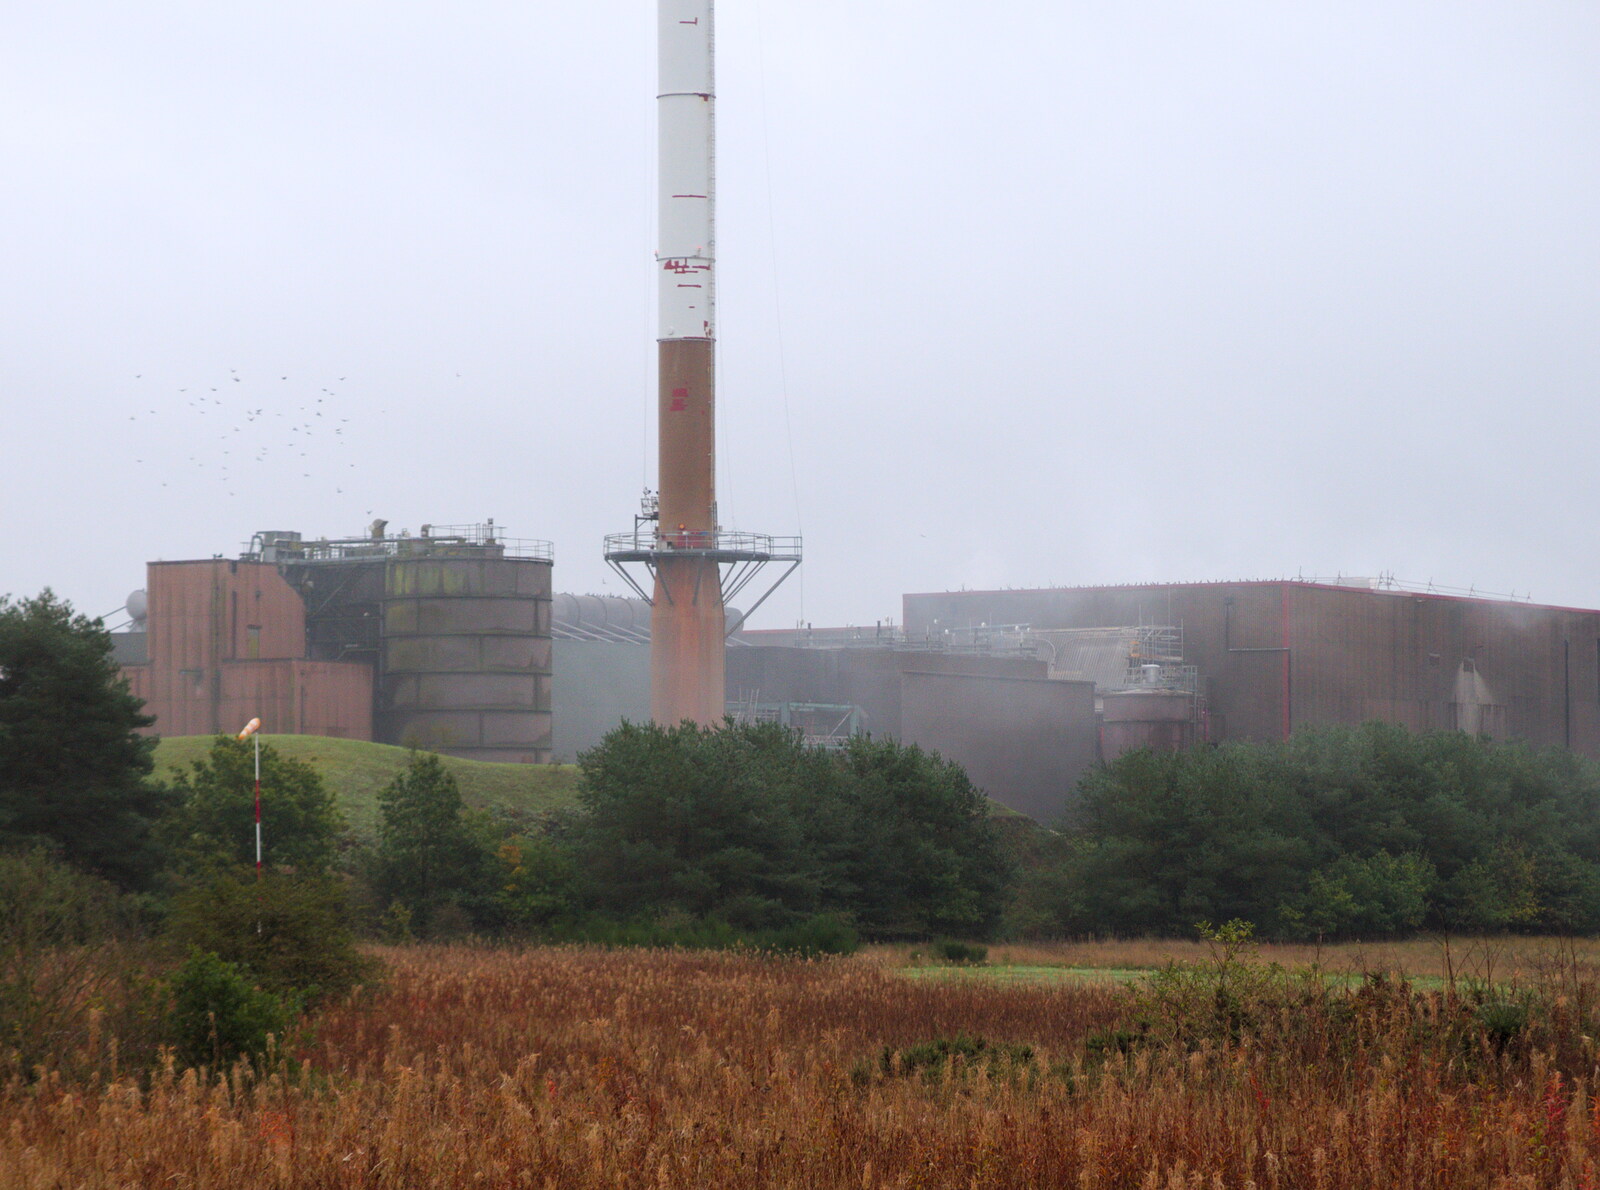 The Thetford power station steams away from The GSB at Stowlangtoft, Beavers, and More XR Rebellions, Suffolk, Norfolk and London - 16th October 2019